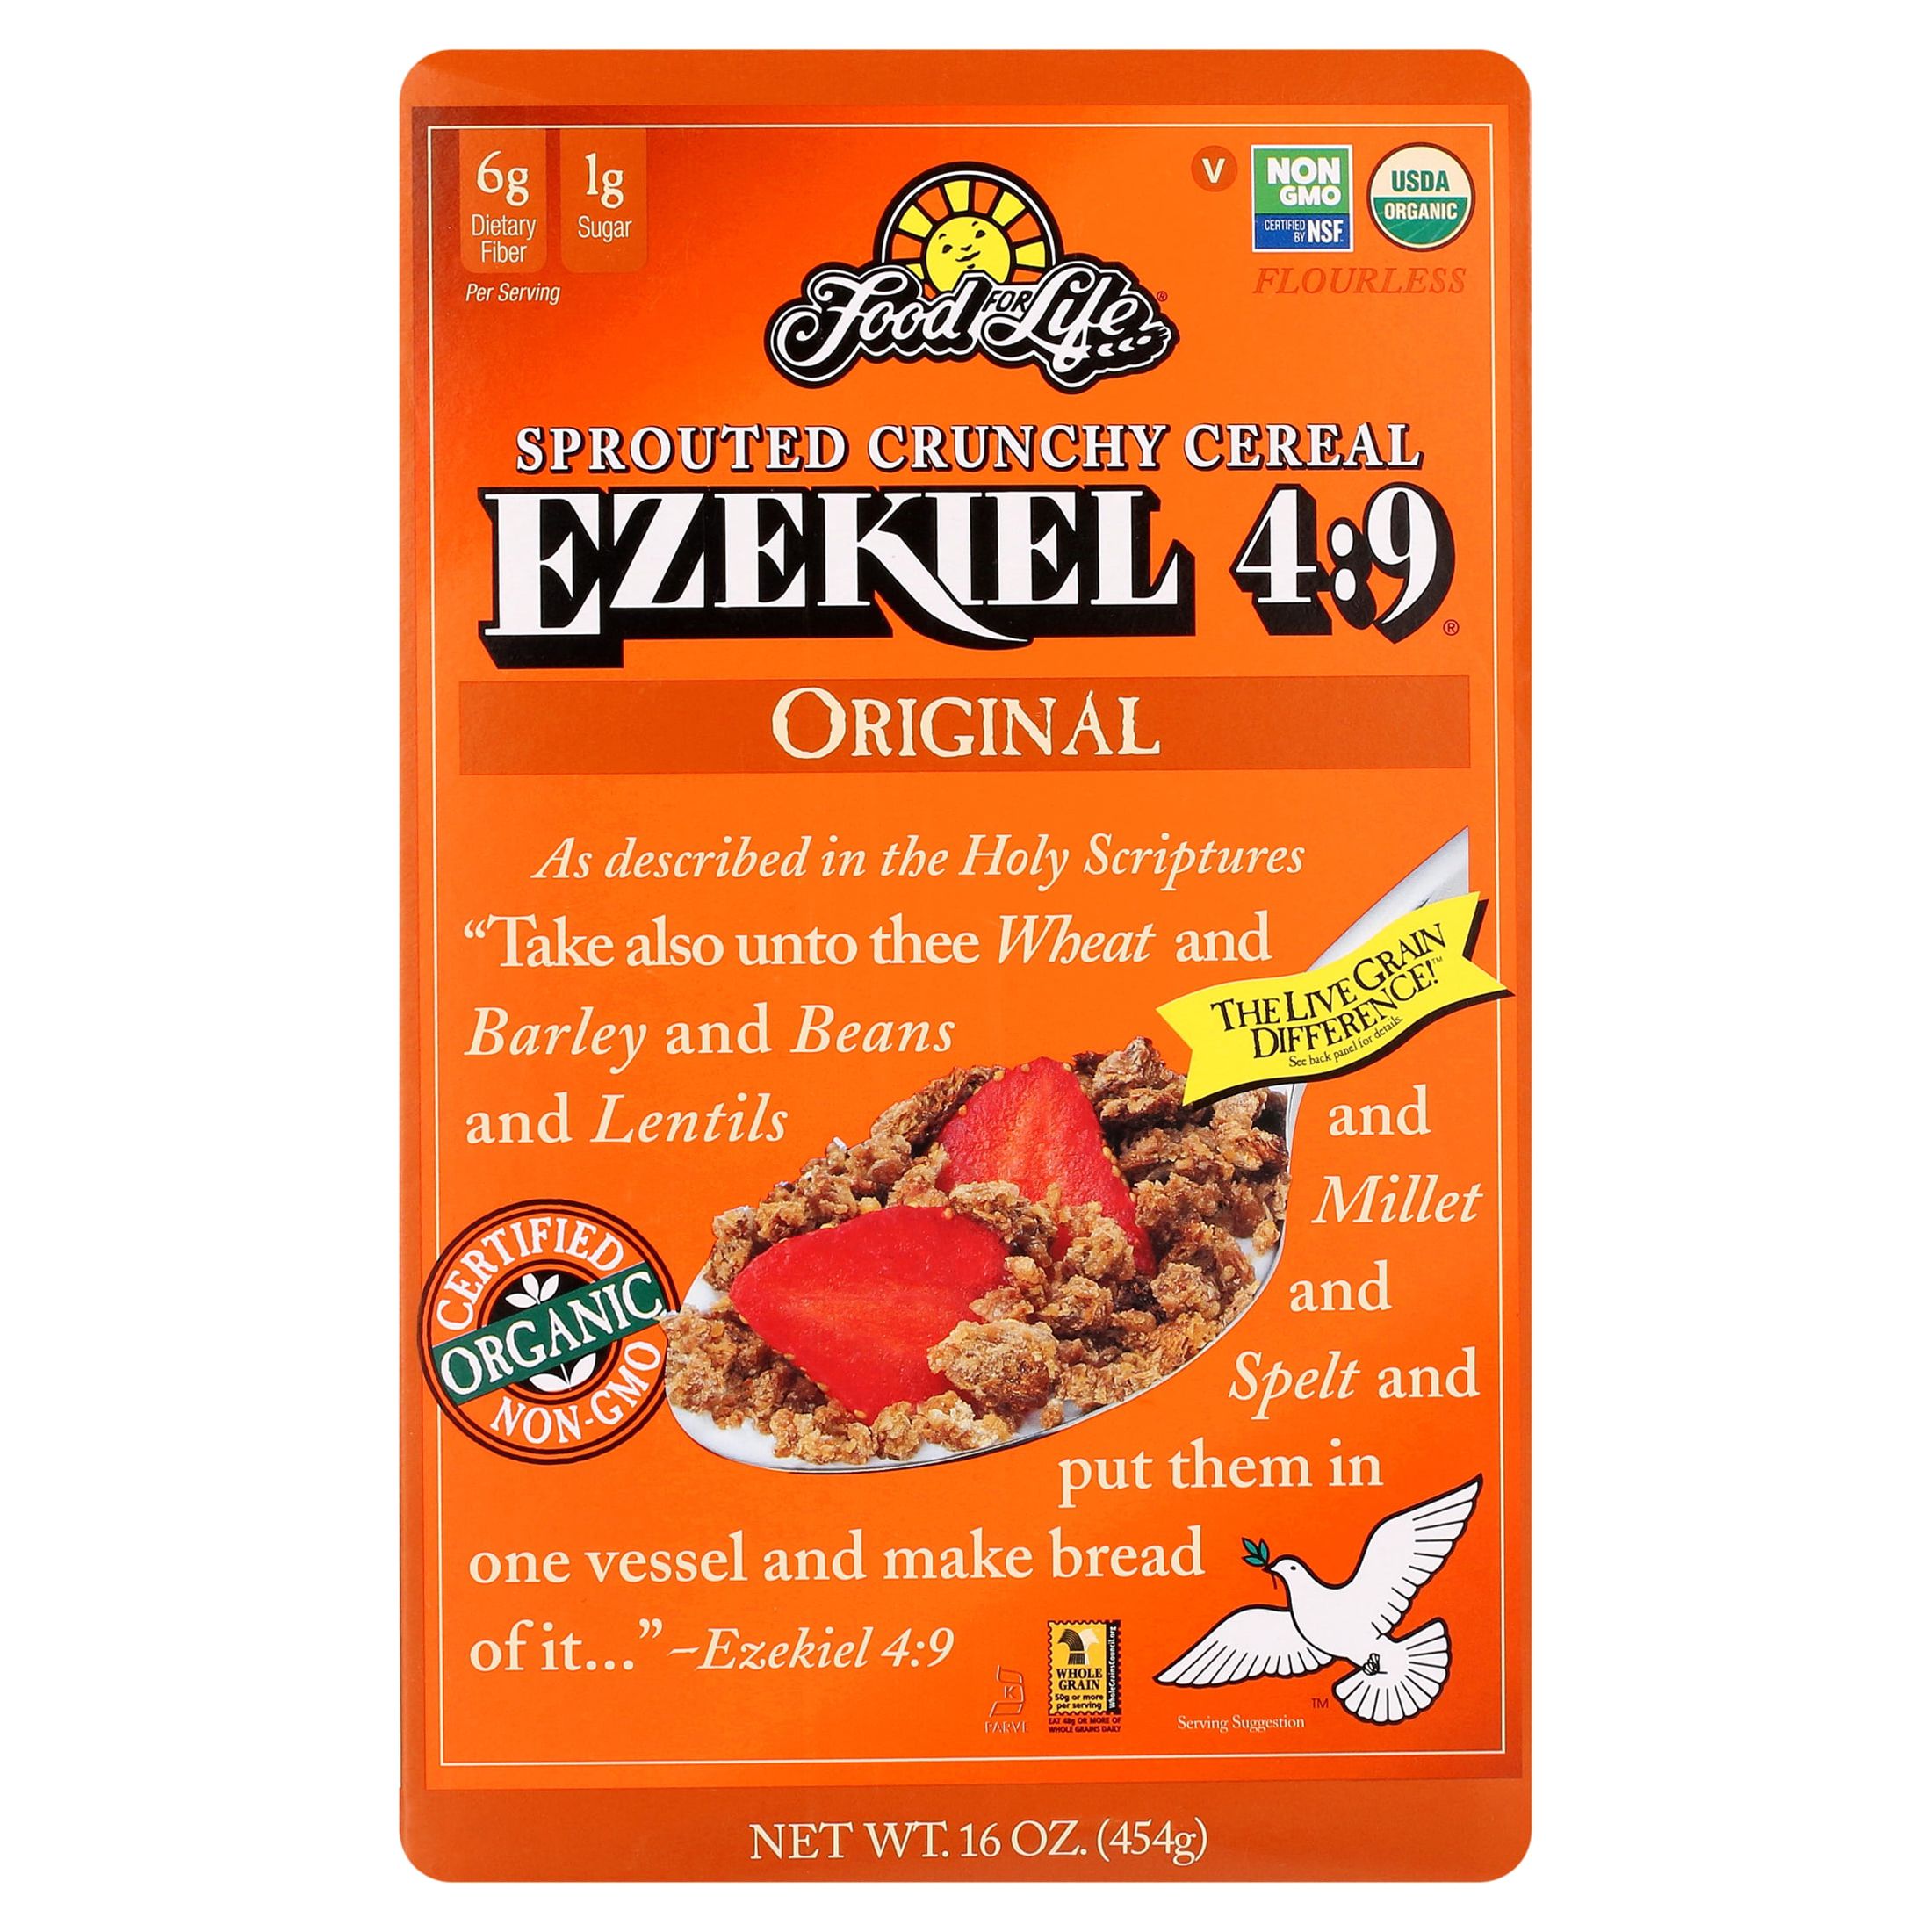 Life　Ezekiel　Baking　Grain　Organic　Whole　16　Co.　Cereal　oz　Sprouted　Original,　Food　For